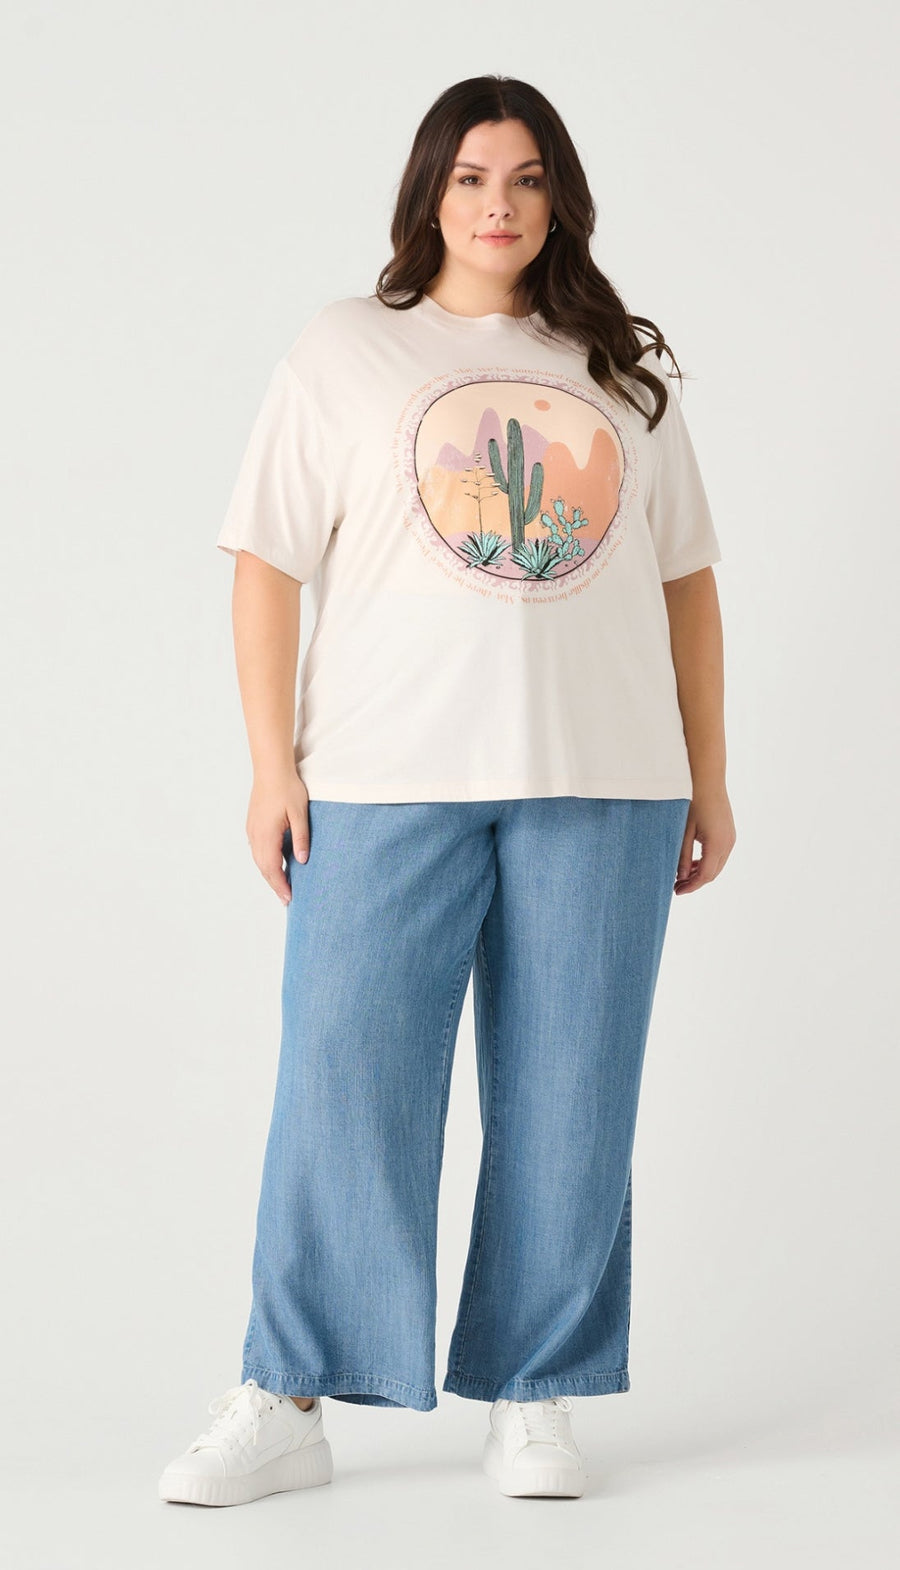 Plus Size graphic tee by Black Tape - Blue Sky Fashions & Lingerie